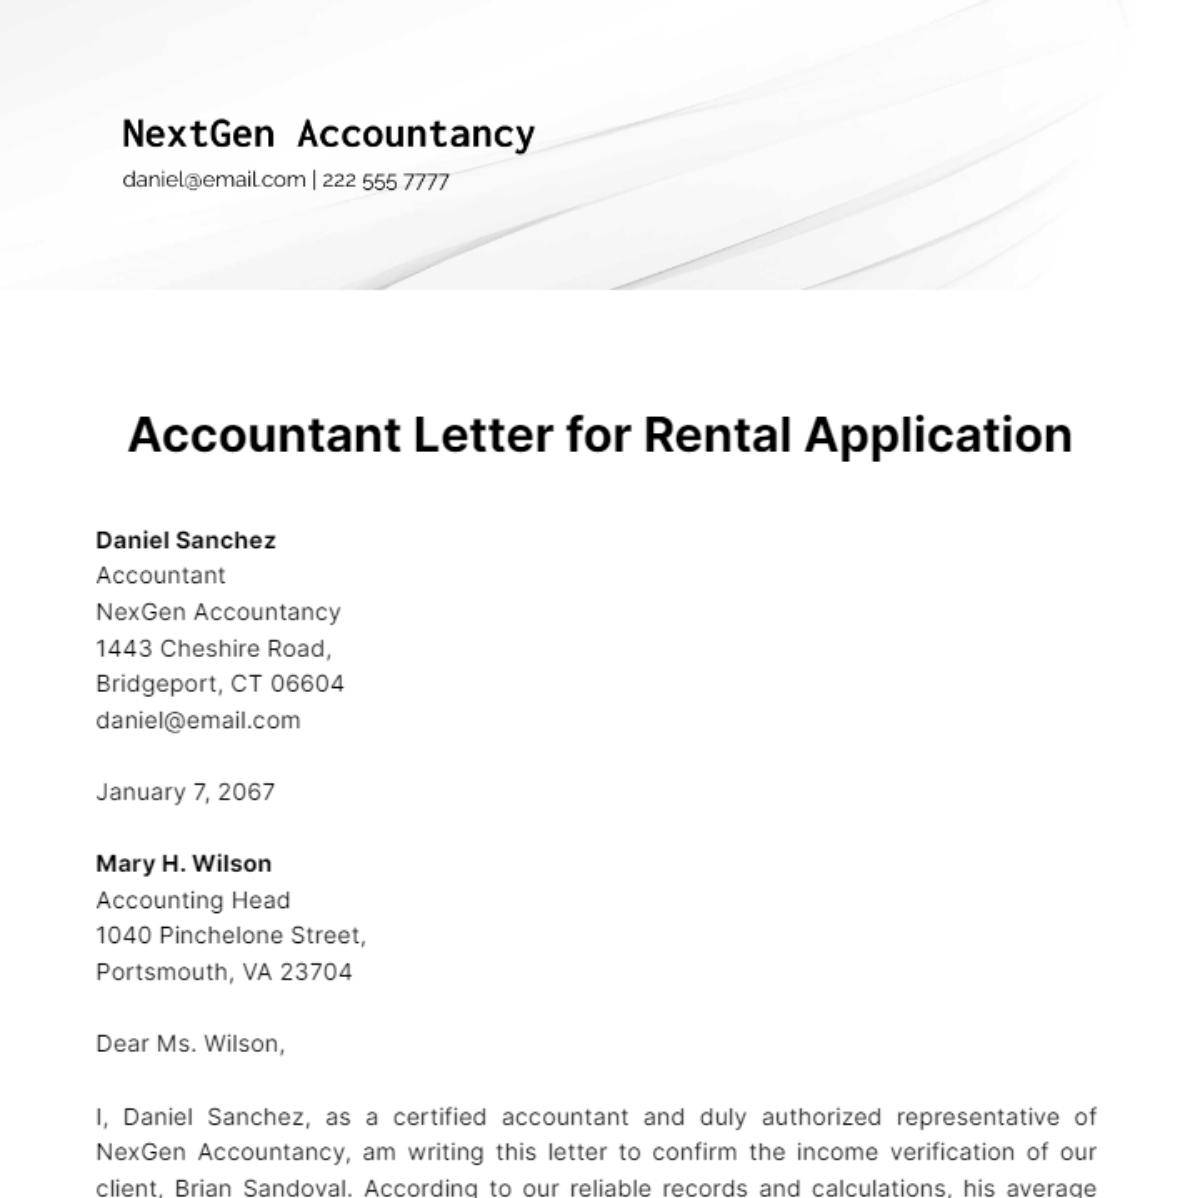 Accountant Letter for Rental Application Template